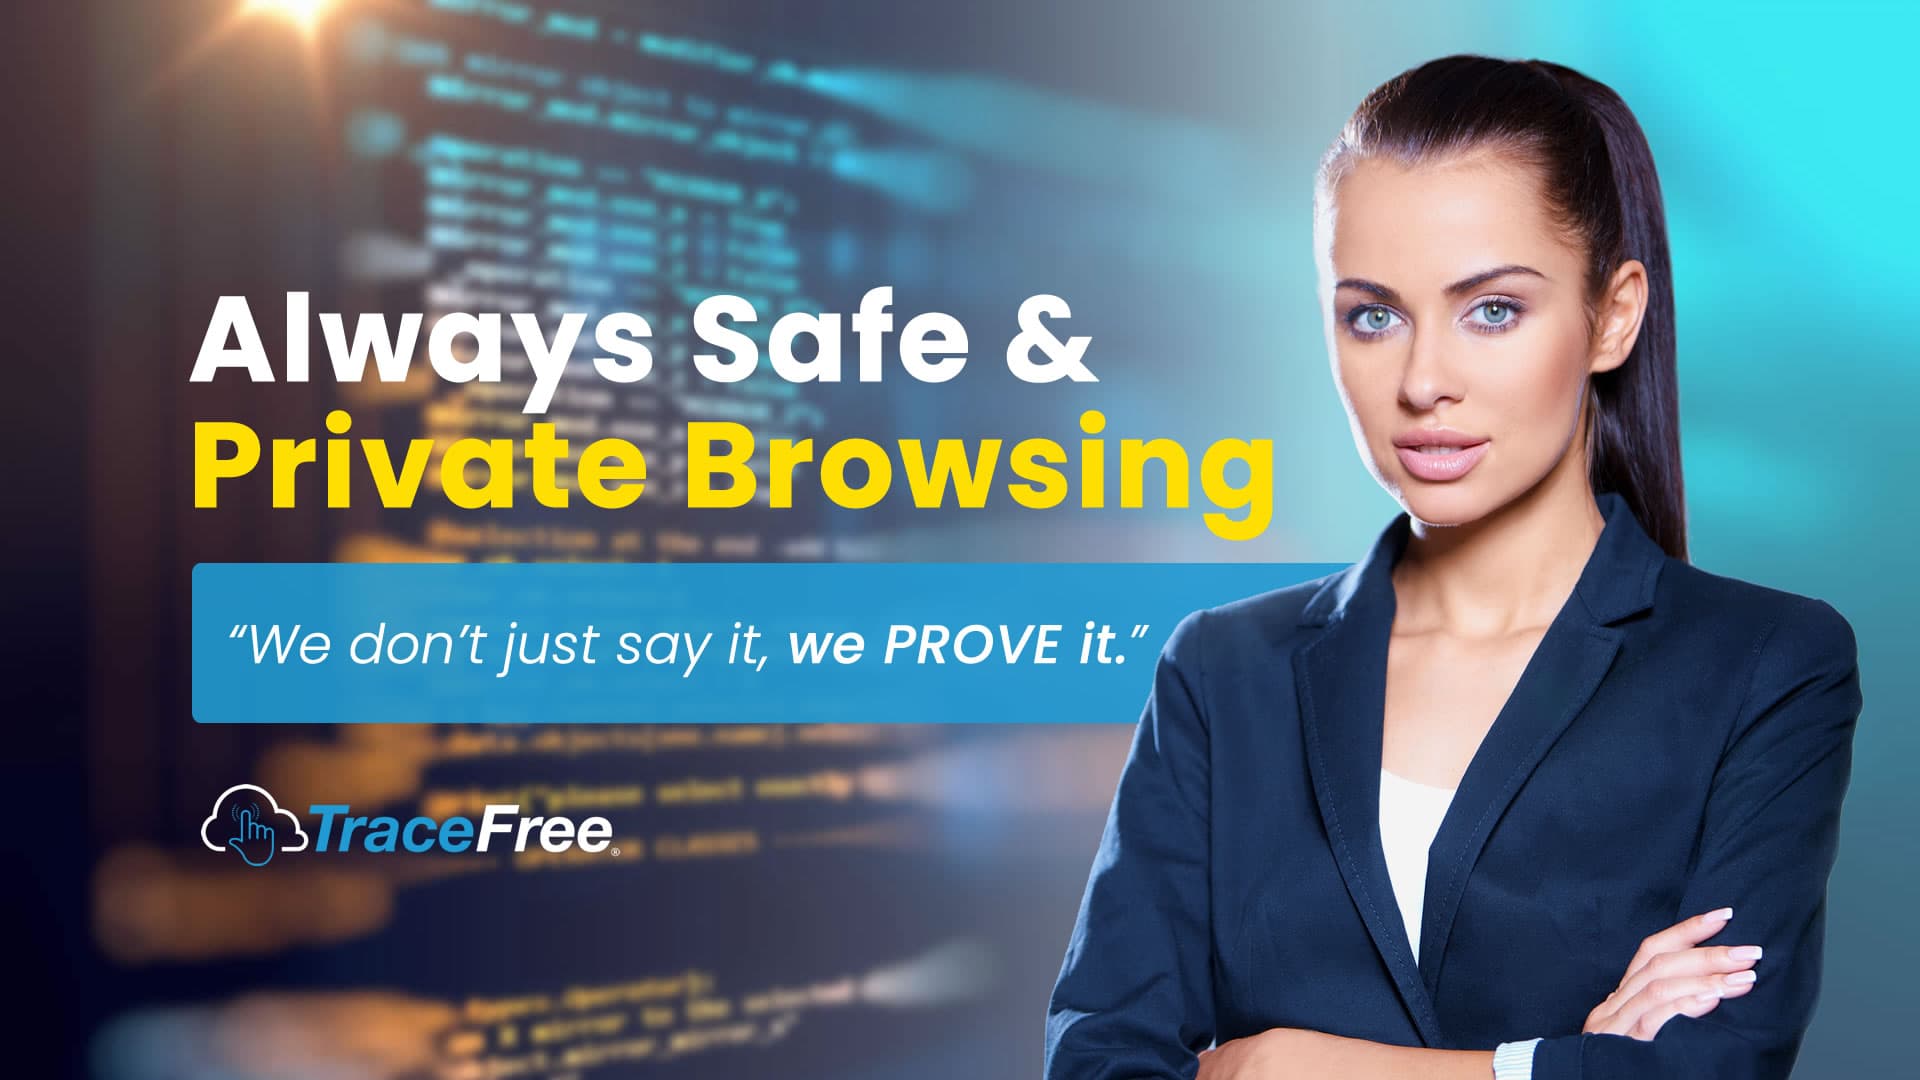 Think your browser keeps you private and secure? Find out with the TraceFree Challenge.